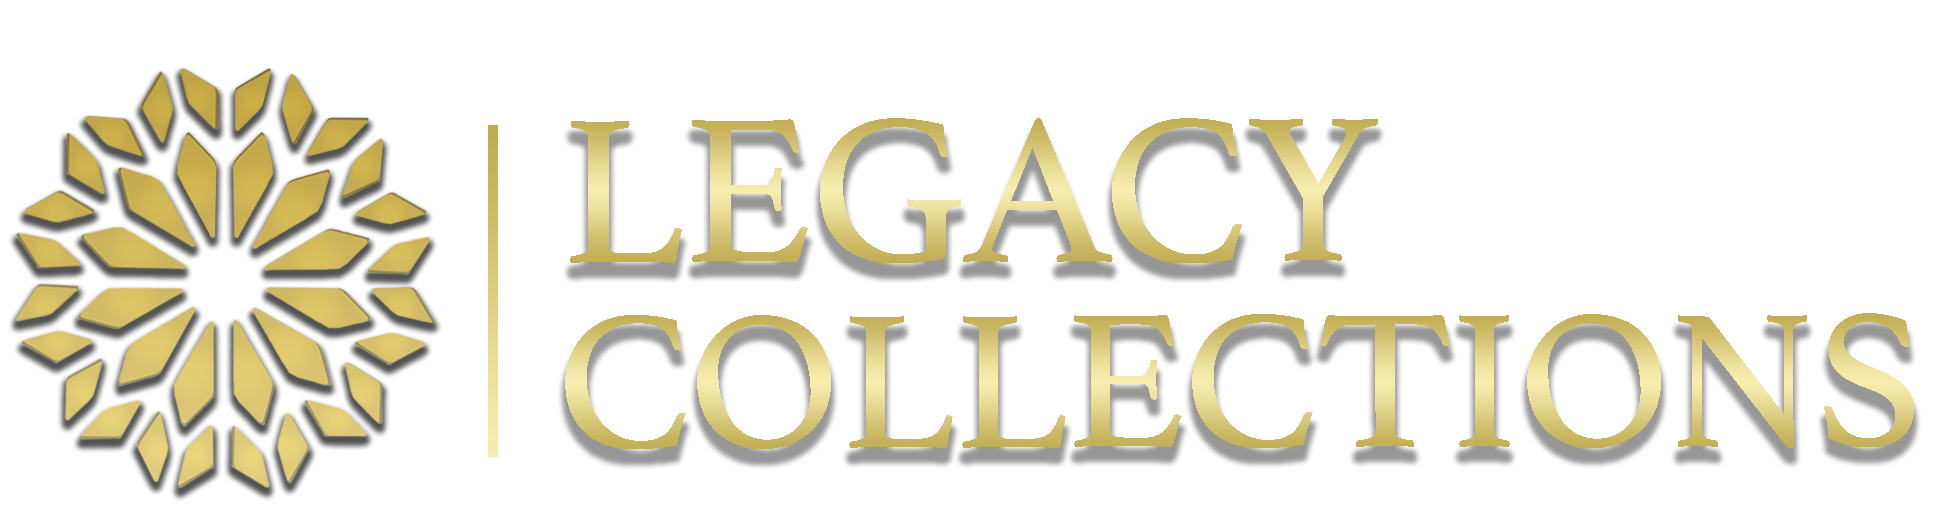 Legacy Collections